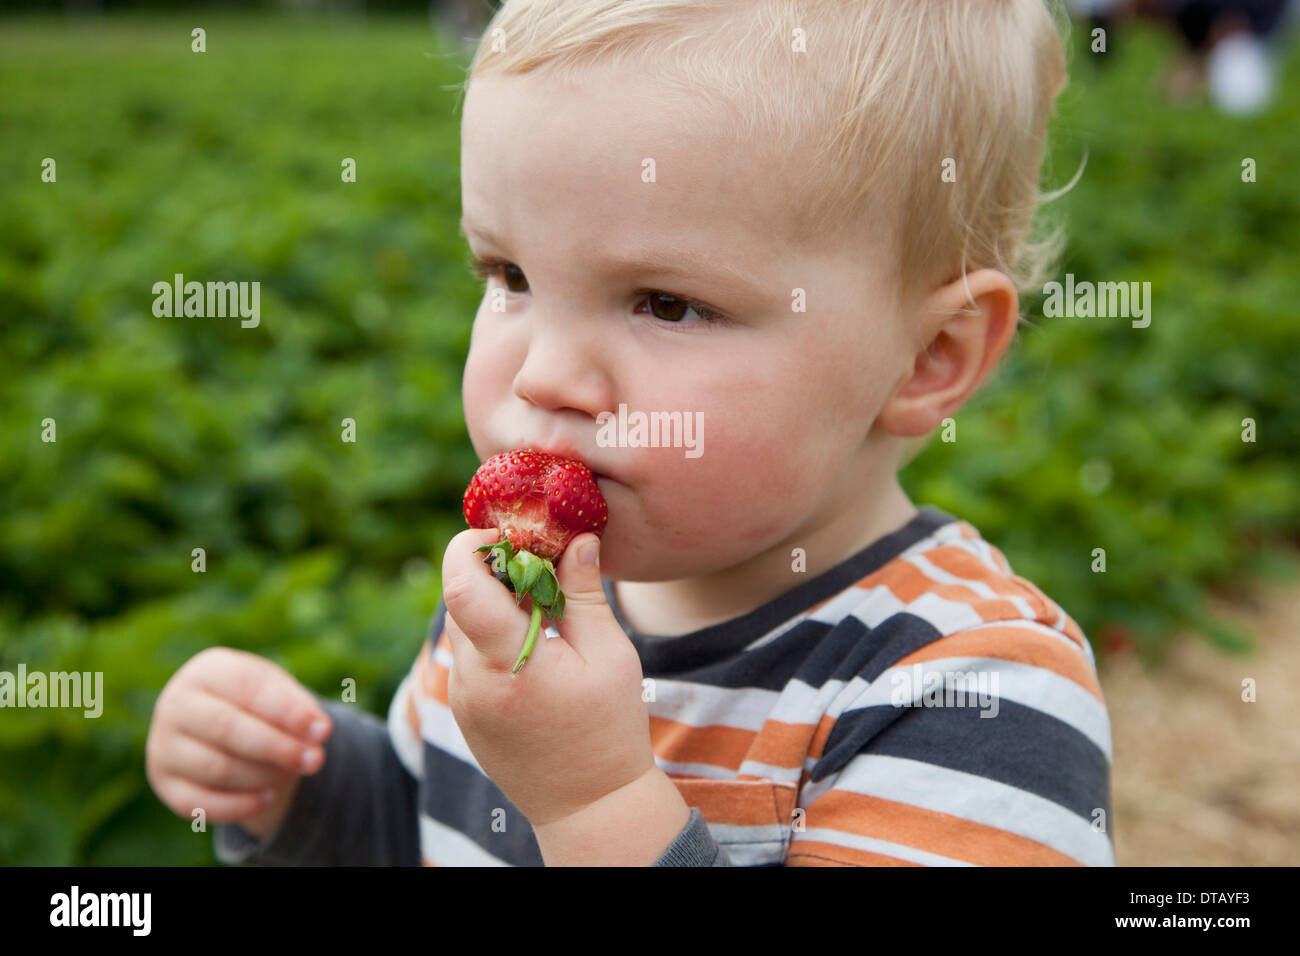 Baby boy eating strawberry, looking away Stock Photo